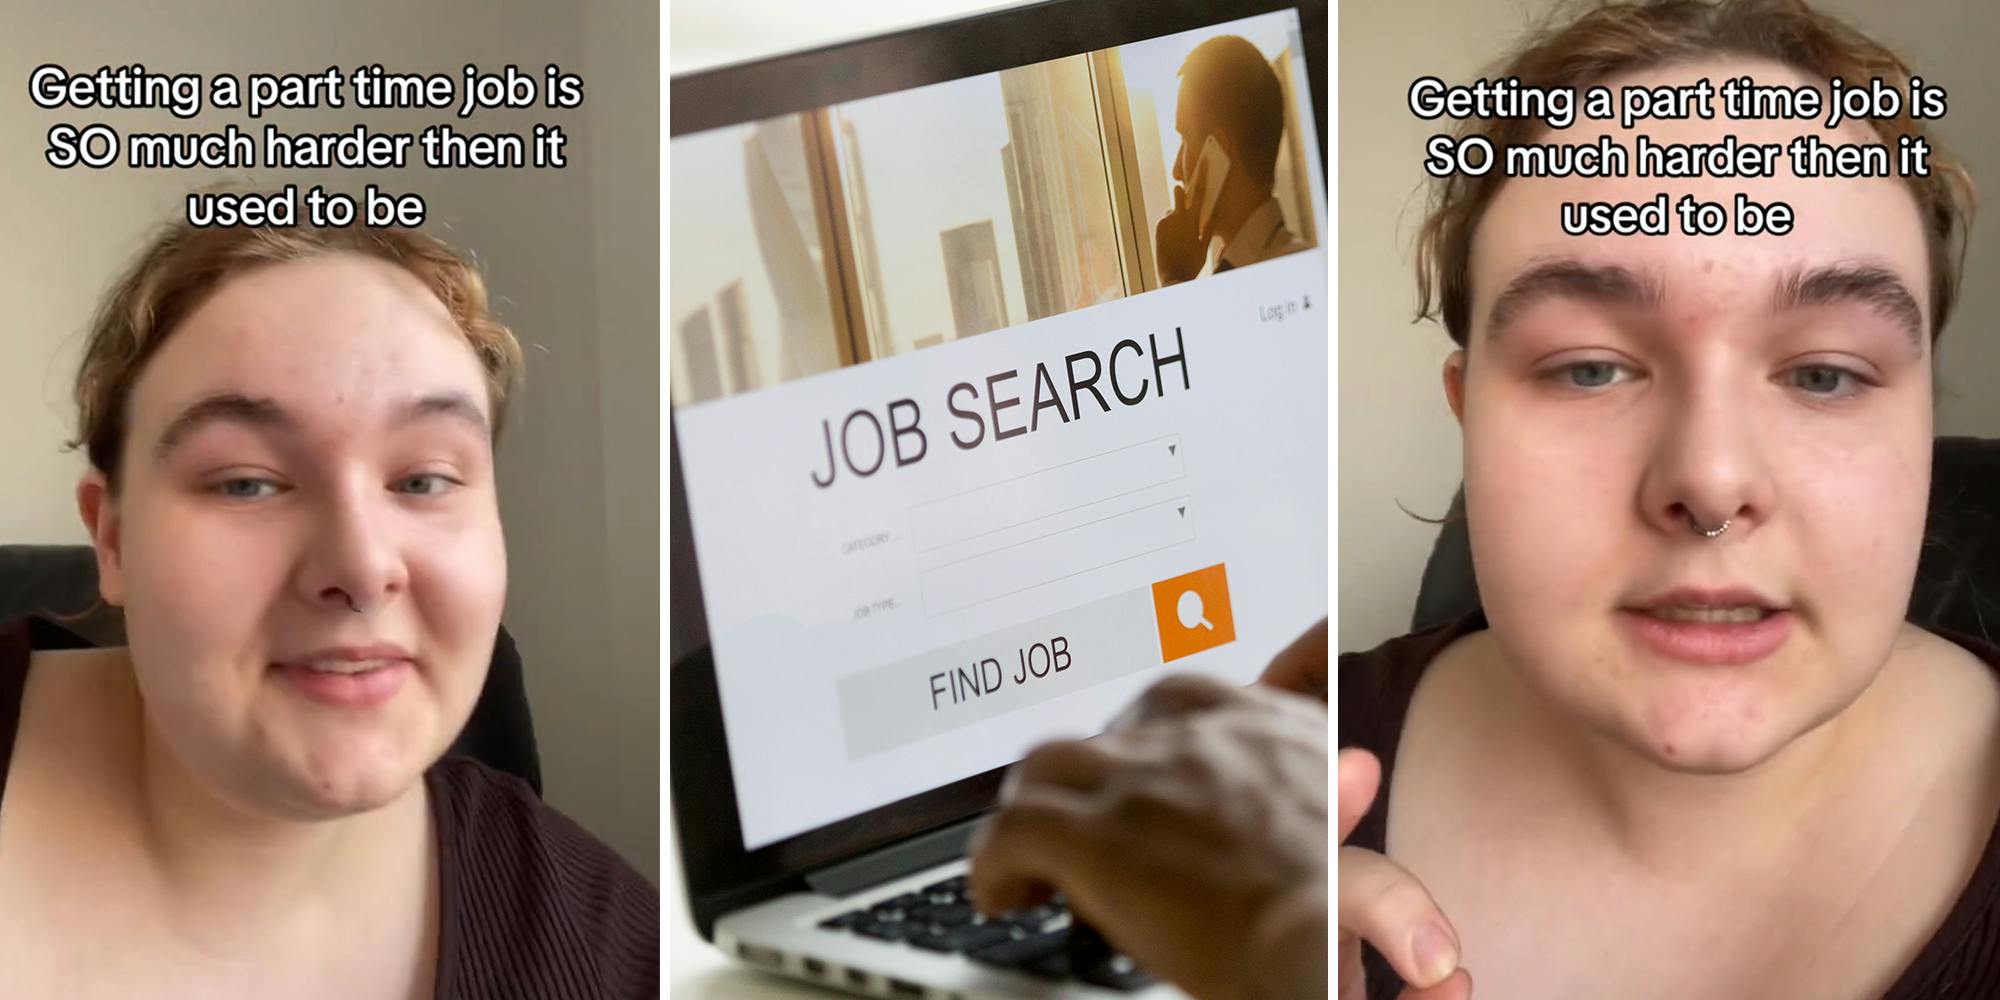 Worker shares what it’s like trying to get a part-time job after calling 32 places with no luck